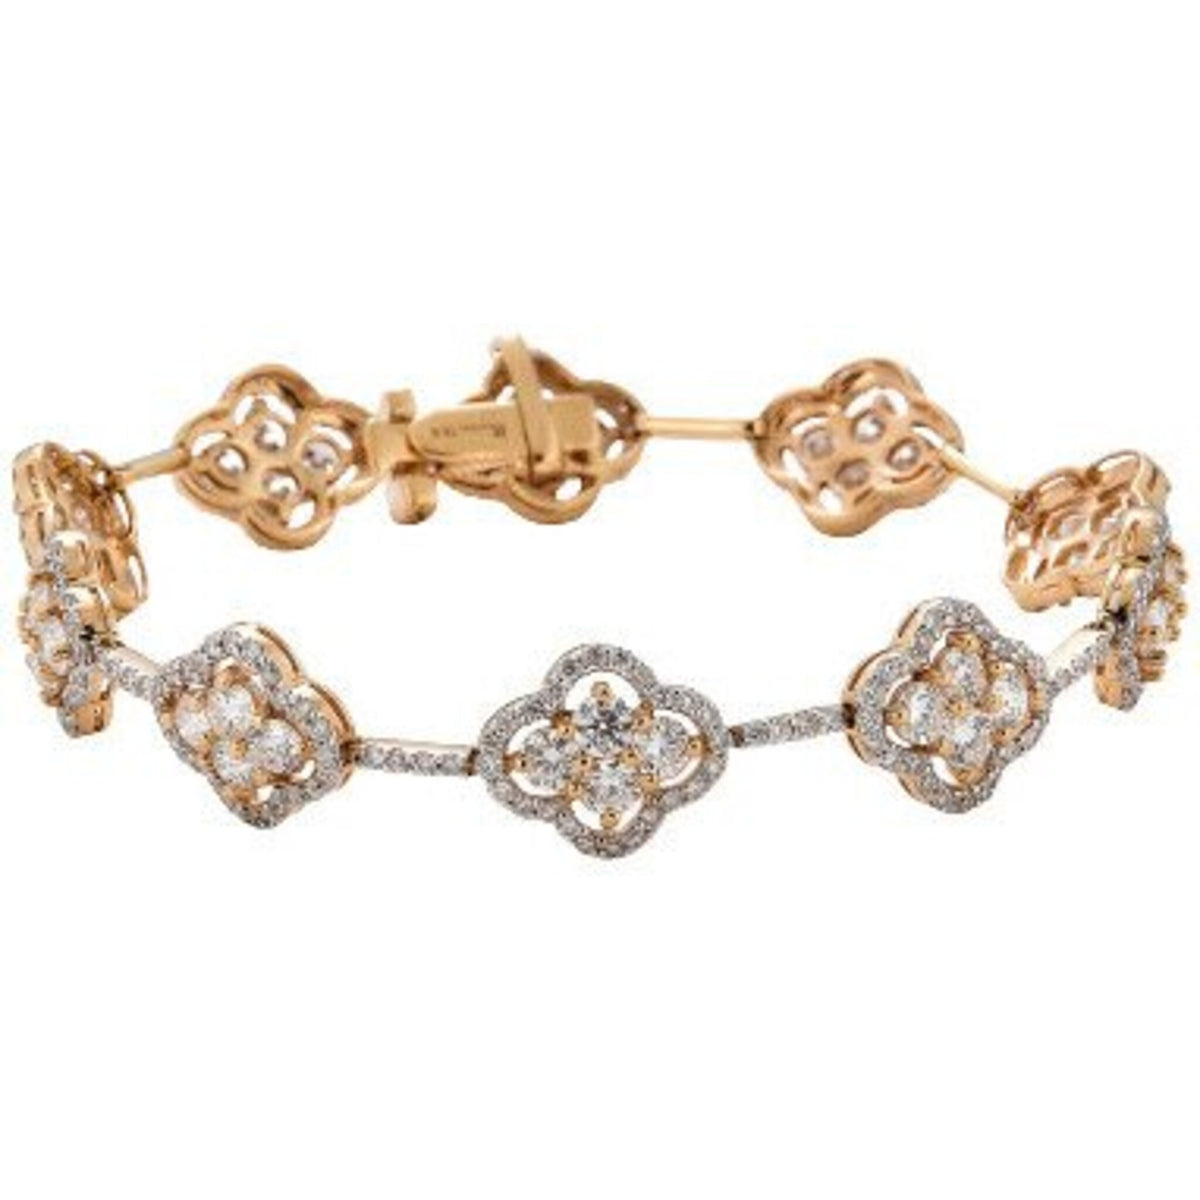 Piranesi - Pacha Bracelet in Diamond and Rose Gold - 18K White and Rose Gold Gold